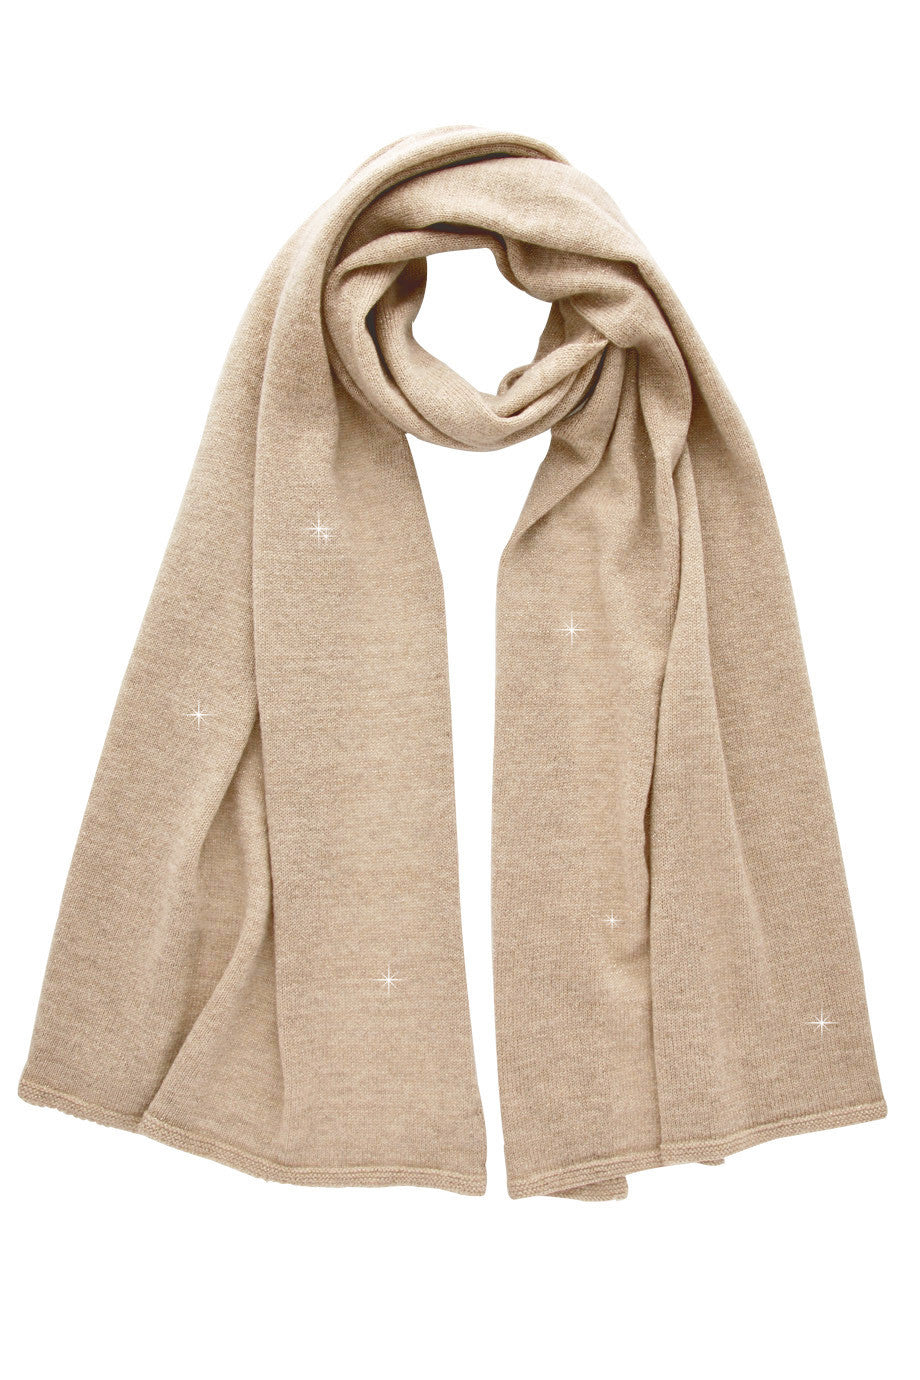 SNOWFLAKE Beige Knitted Scarf